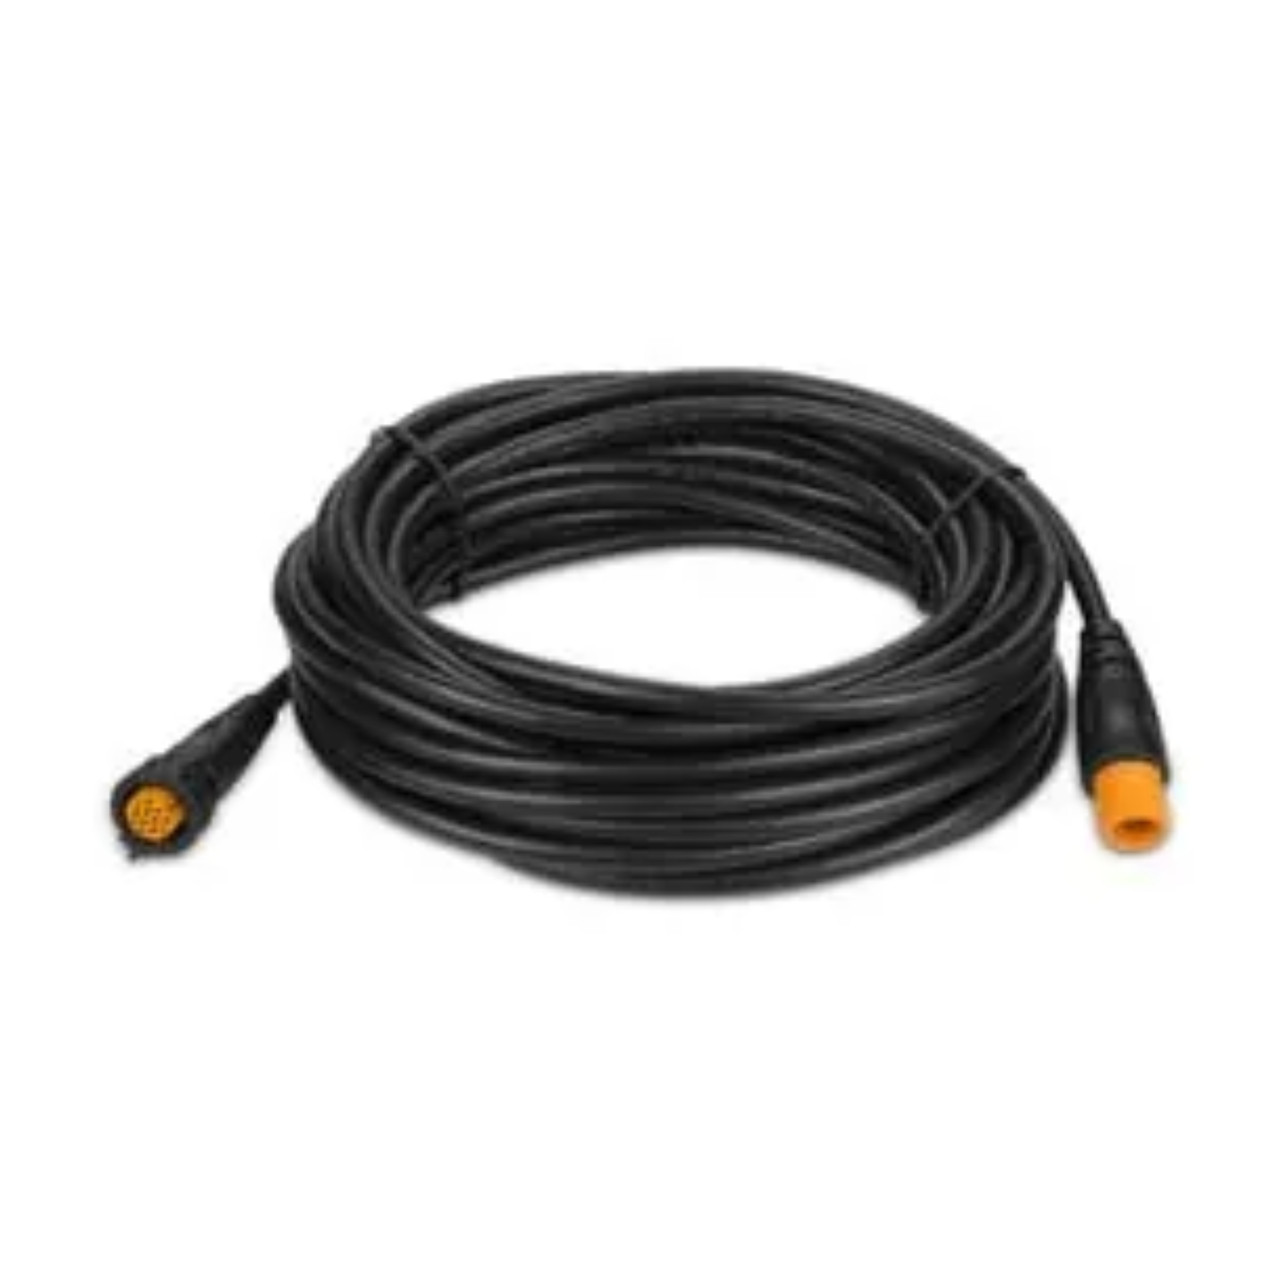 Garmin New OEM Extension Cable for 12-pin Garmin Scanning Transducers, 010-11617-42